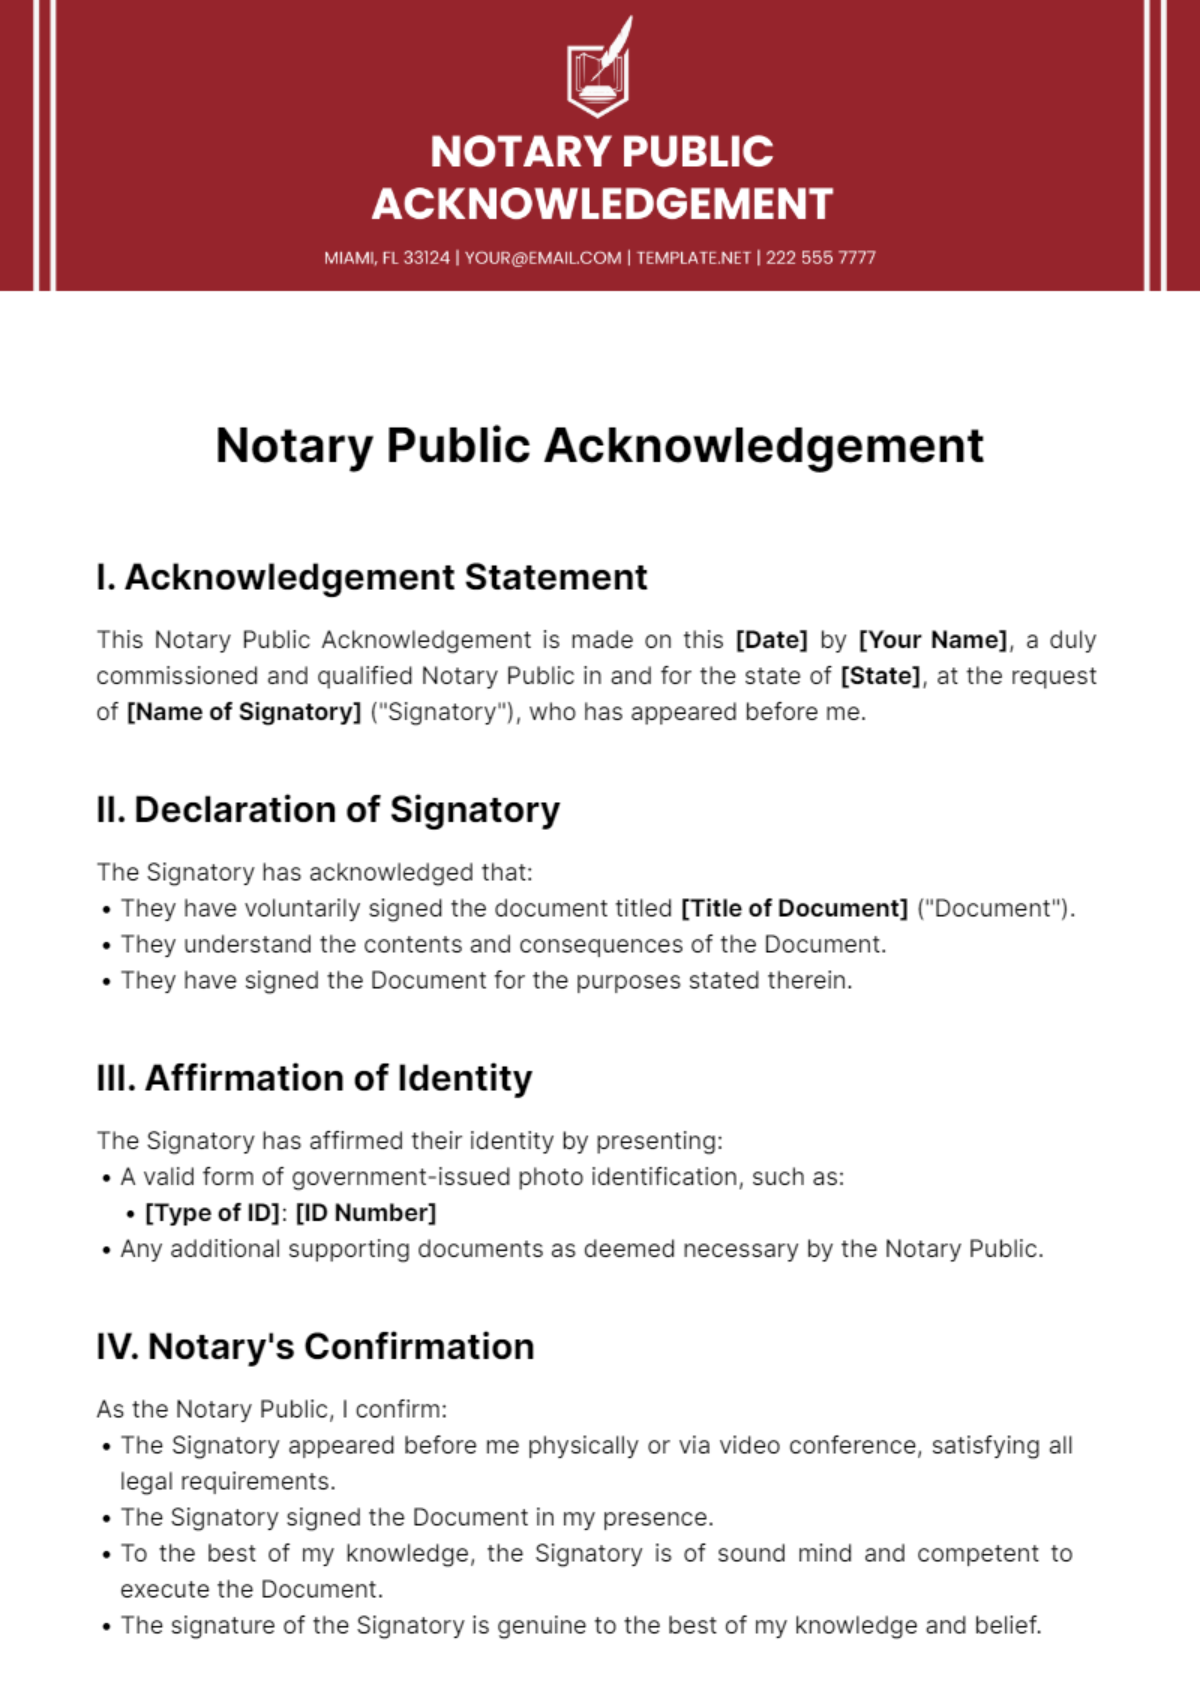 Free Notary Public Acknowledgement Template